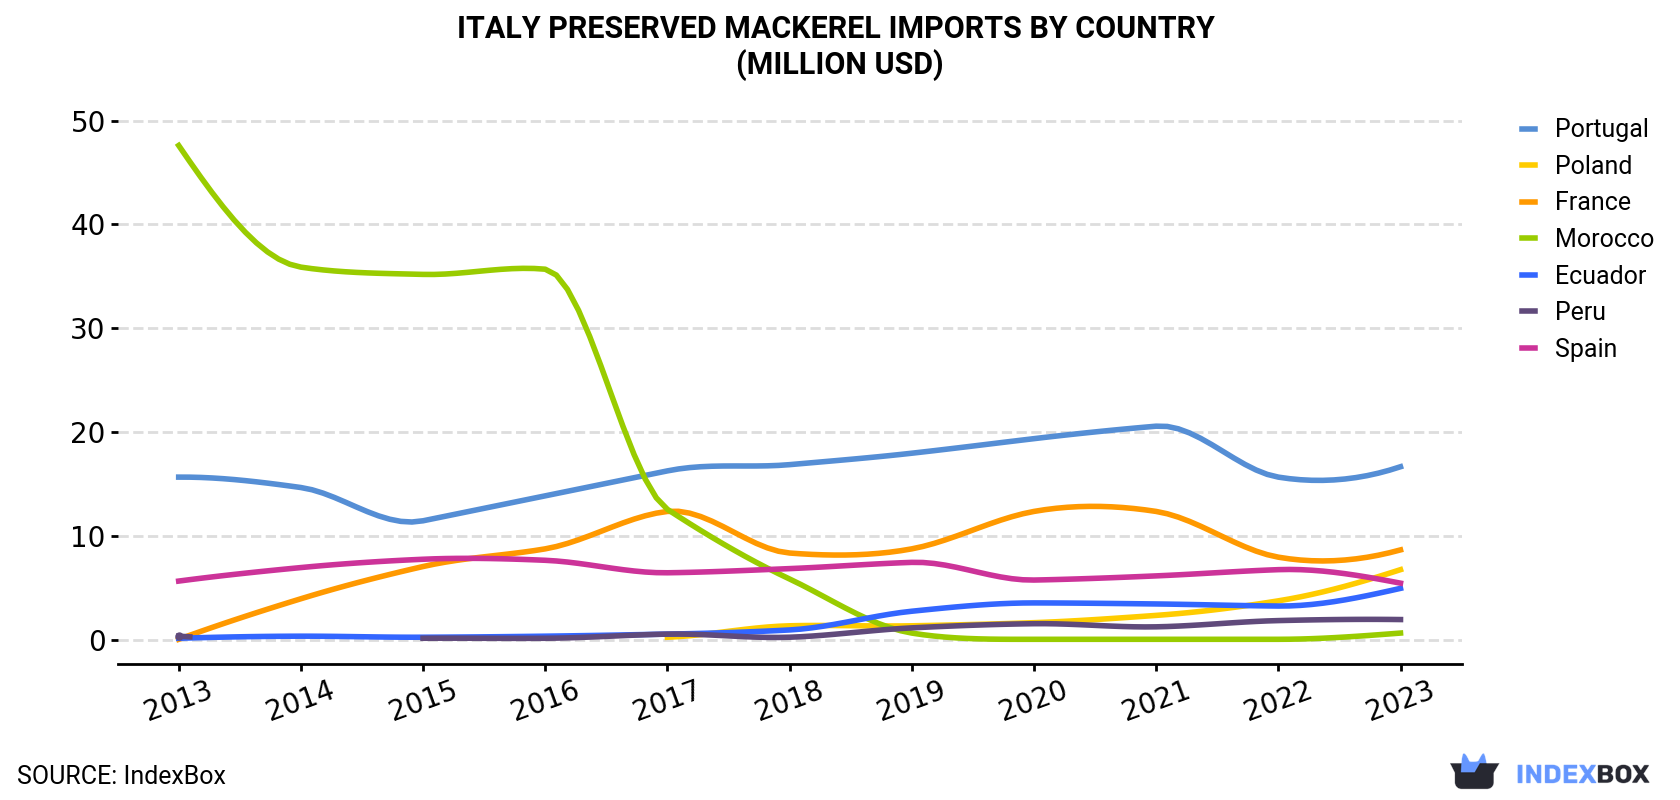 Italy Preserved Mackerel Imports By Country (Million USD)